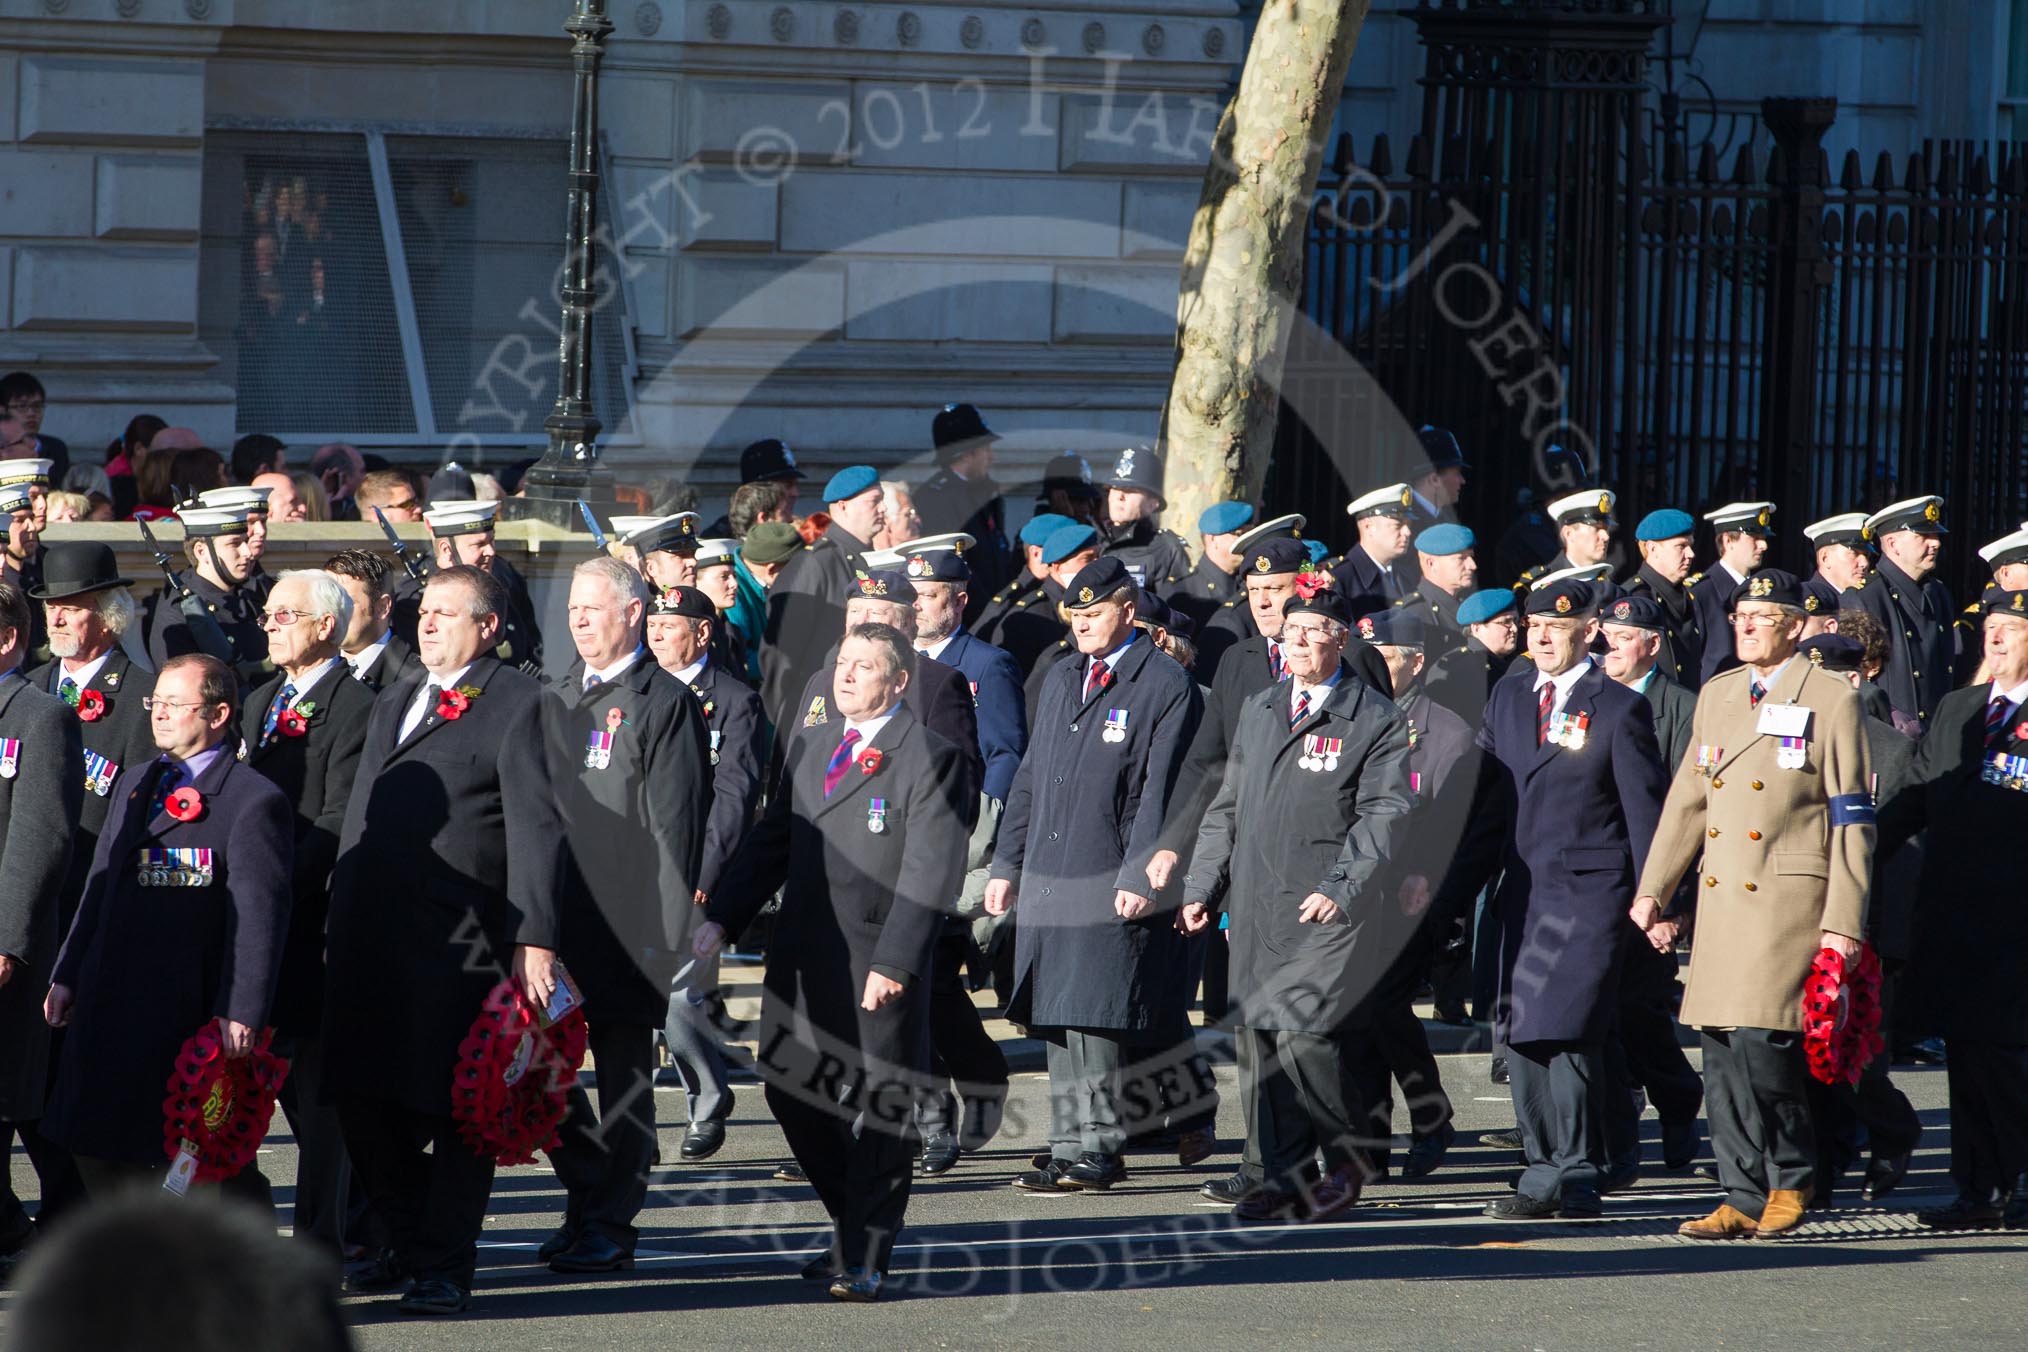 Remembrance Sunday 2012 Cenotaph March Past: Group B18 - Association of Ammunition Technicians and B18 - Beachley Old Boys Association..
Whitehall, Cenotaph,
London SW1,

United Kingdom,
on 11 November 2012 at 11:57, image #925